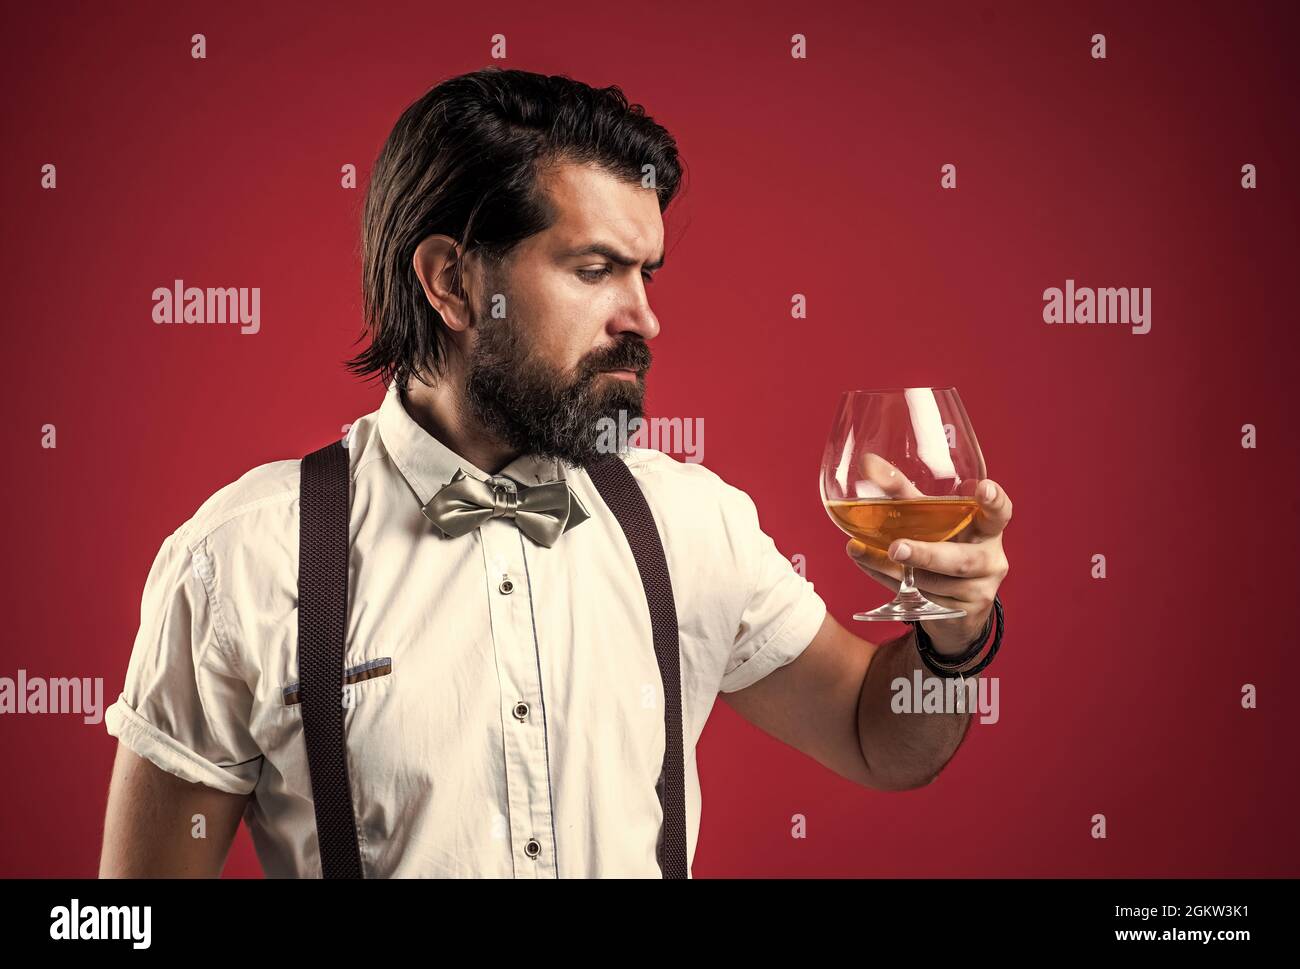 handsome guy hipster with moustache and beard drink kignac, barkeeper Stock Photo